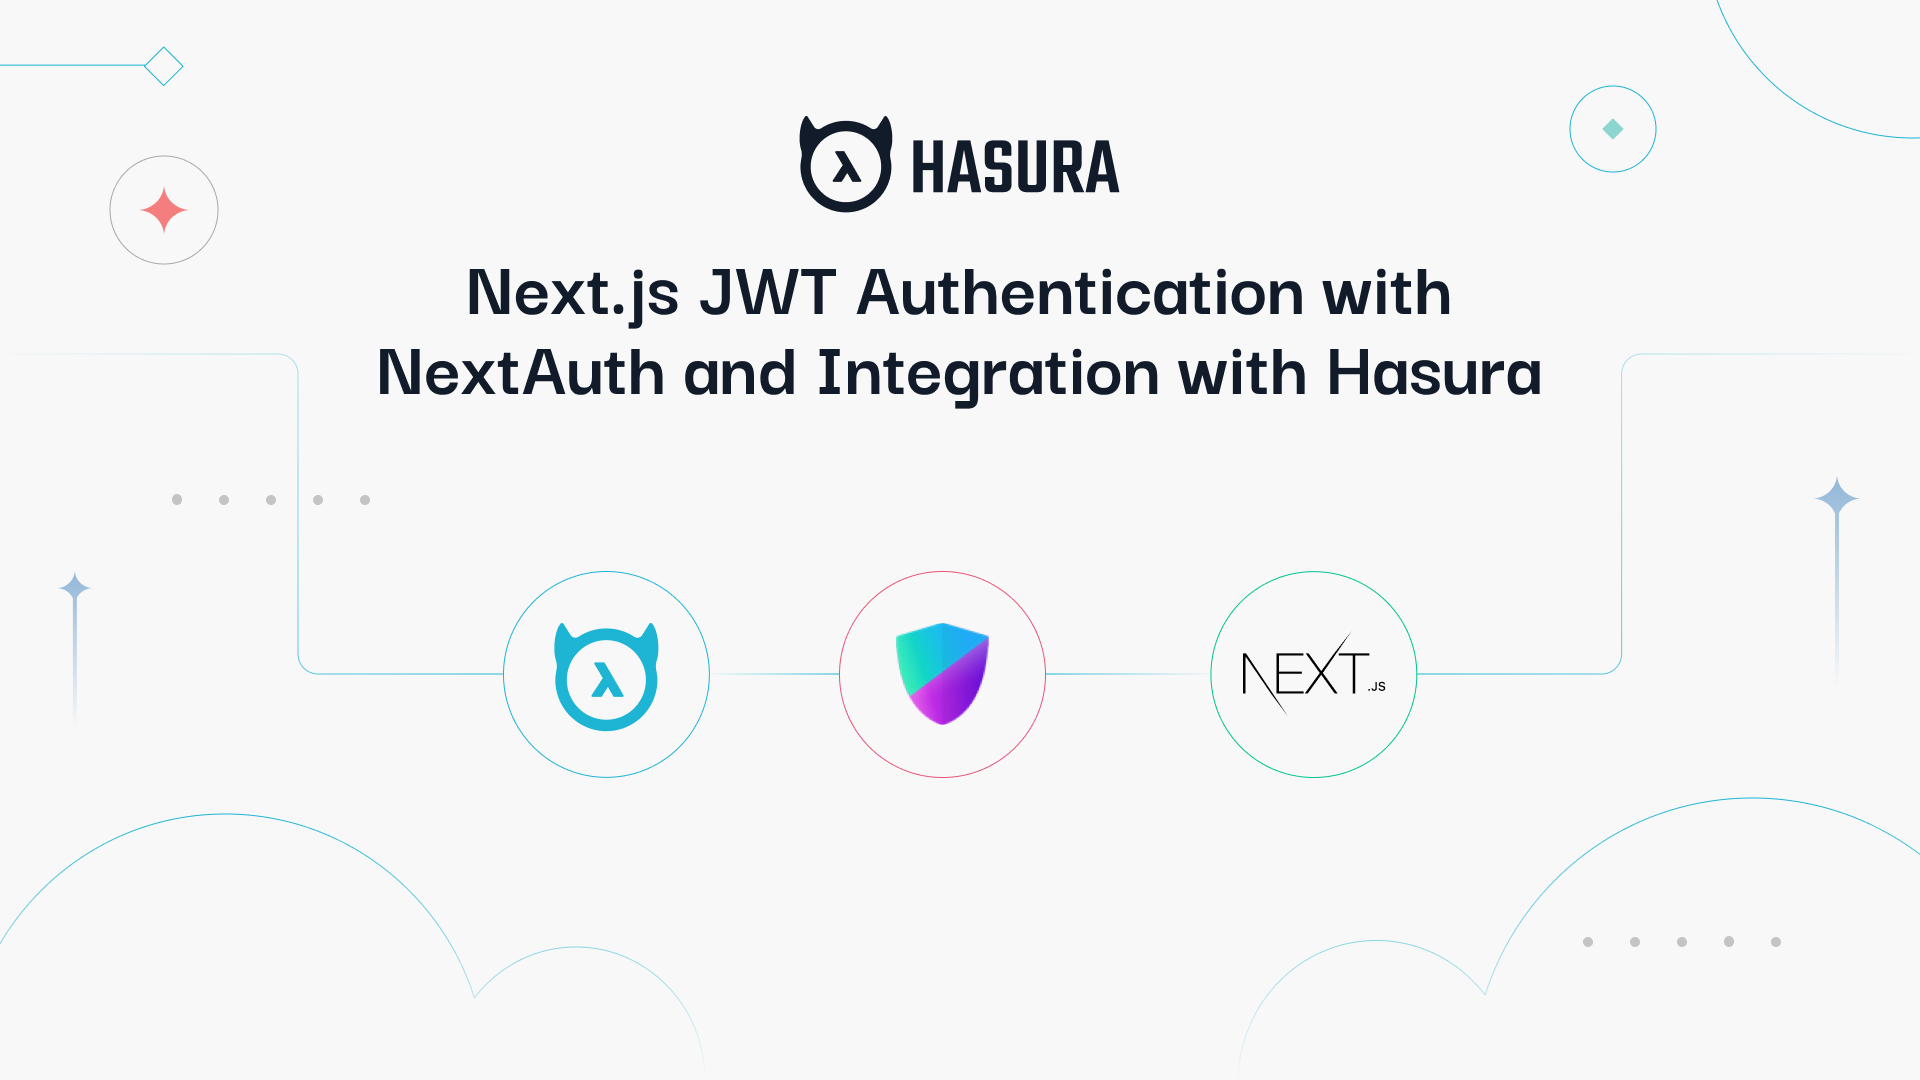 Next.js JWT Authentication with NextAuth and Integration with Hasura